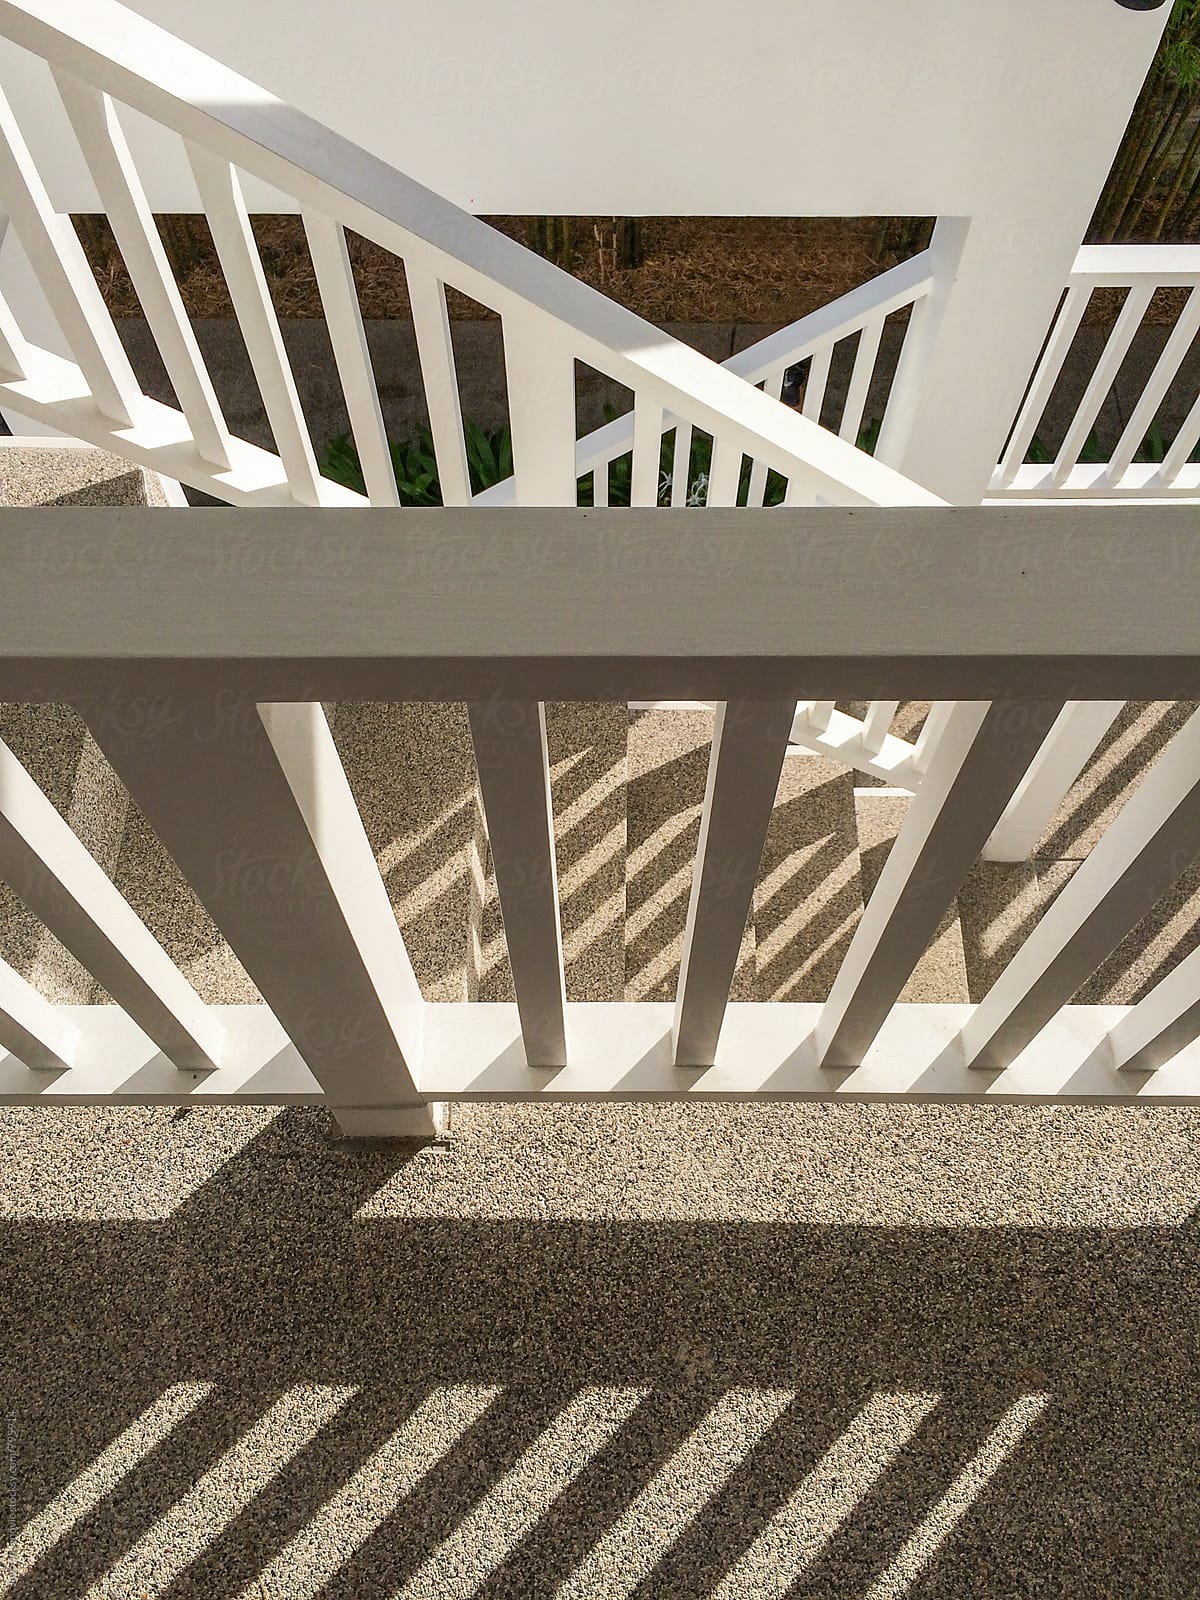 Vertical view of a staircase and railings